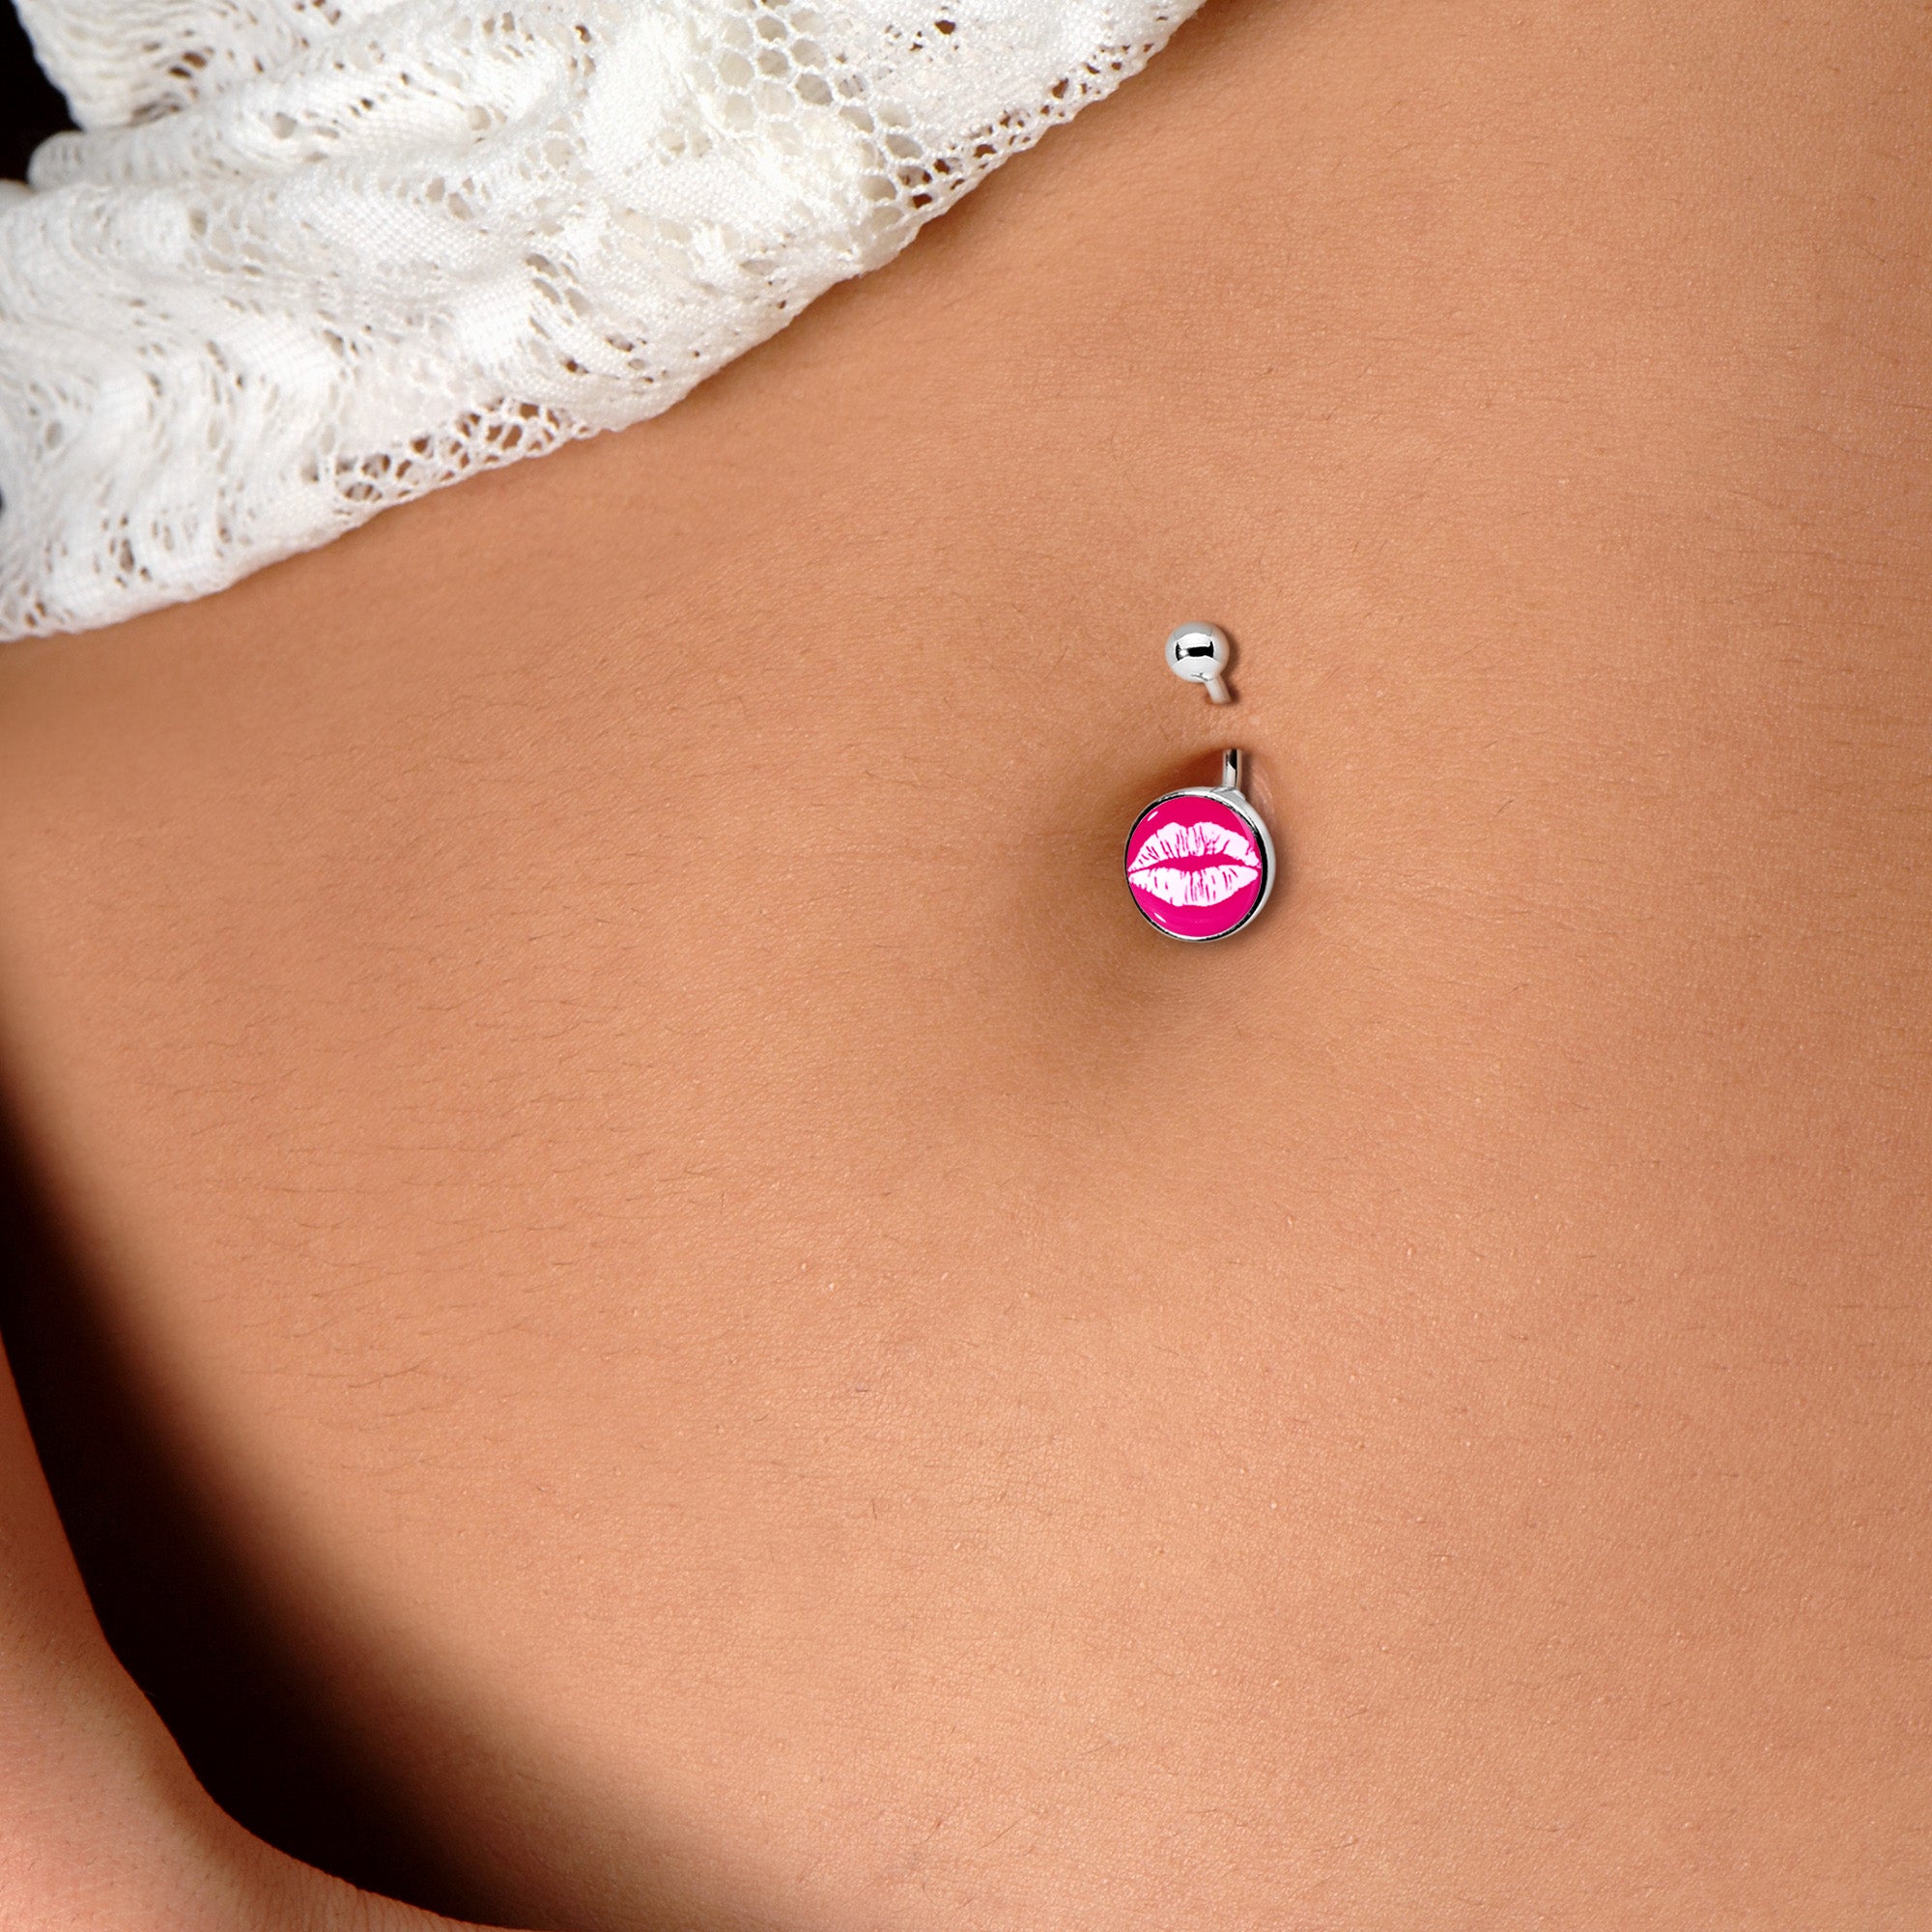 Sexy Butterfly Pendant Belly Button Piercing Butterfly Ombligo Nombril Body  Jewelry From Tomorrowbetter8899, $2.67 | DHgate.Com